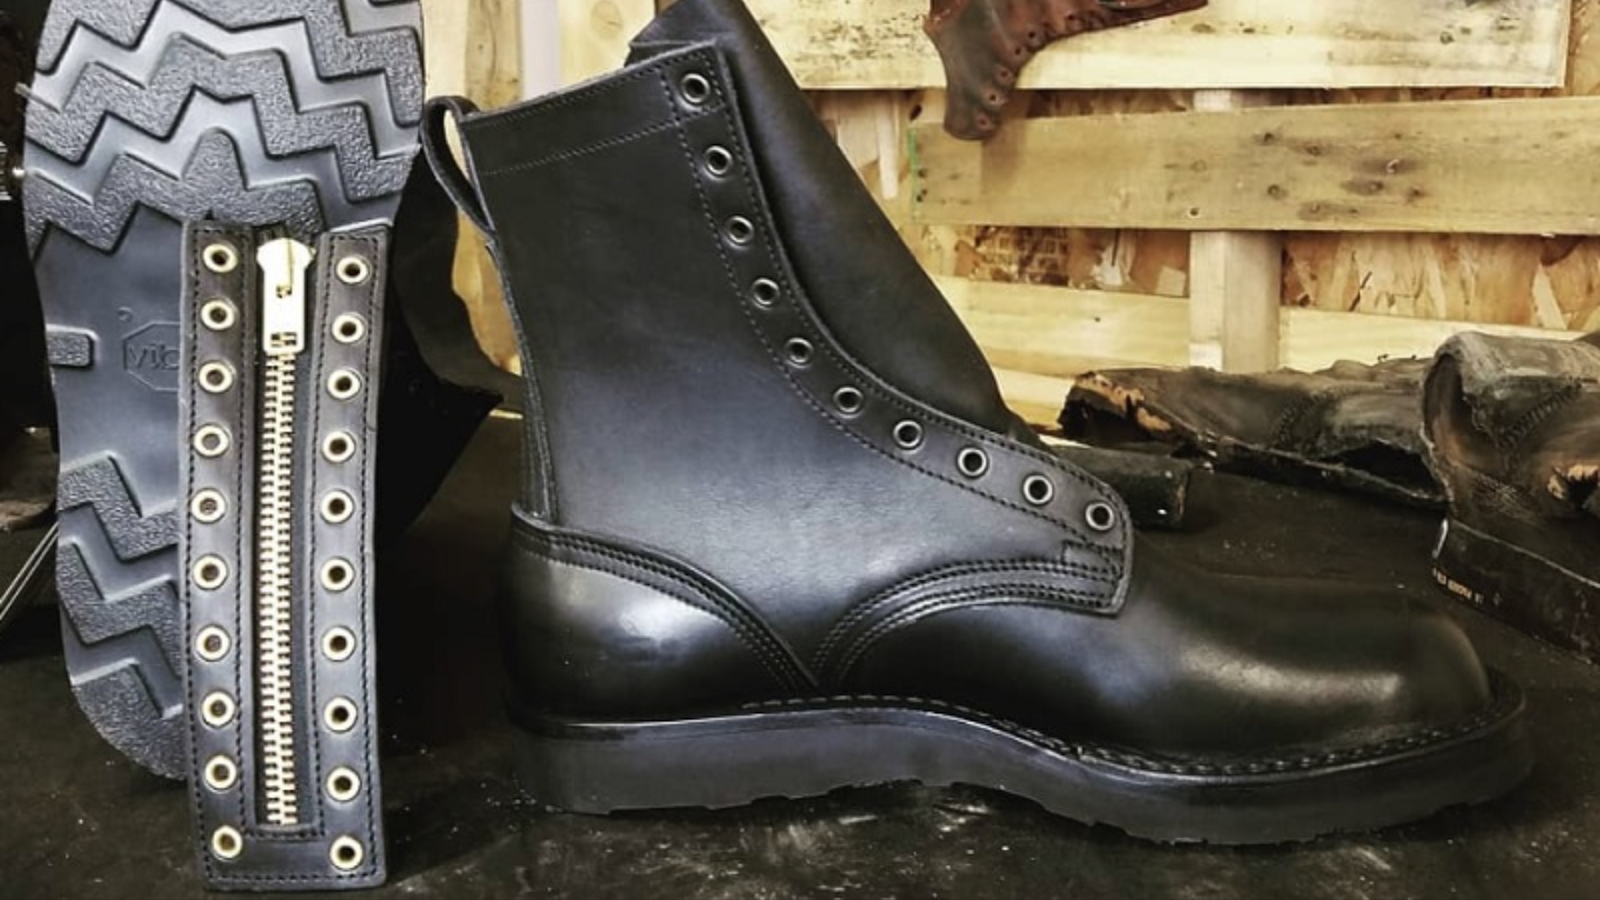 Alternative to Rubber boots: Leather boots